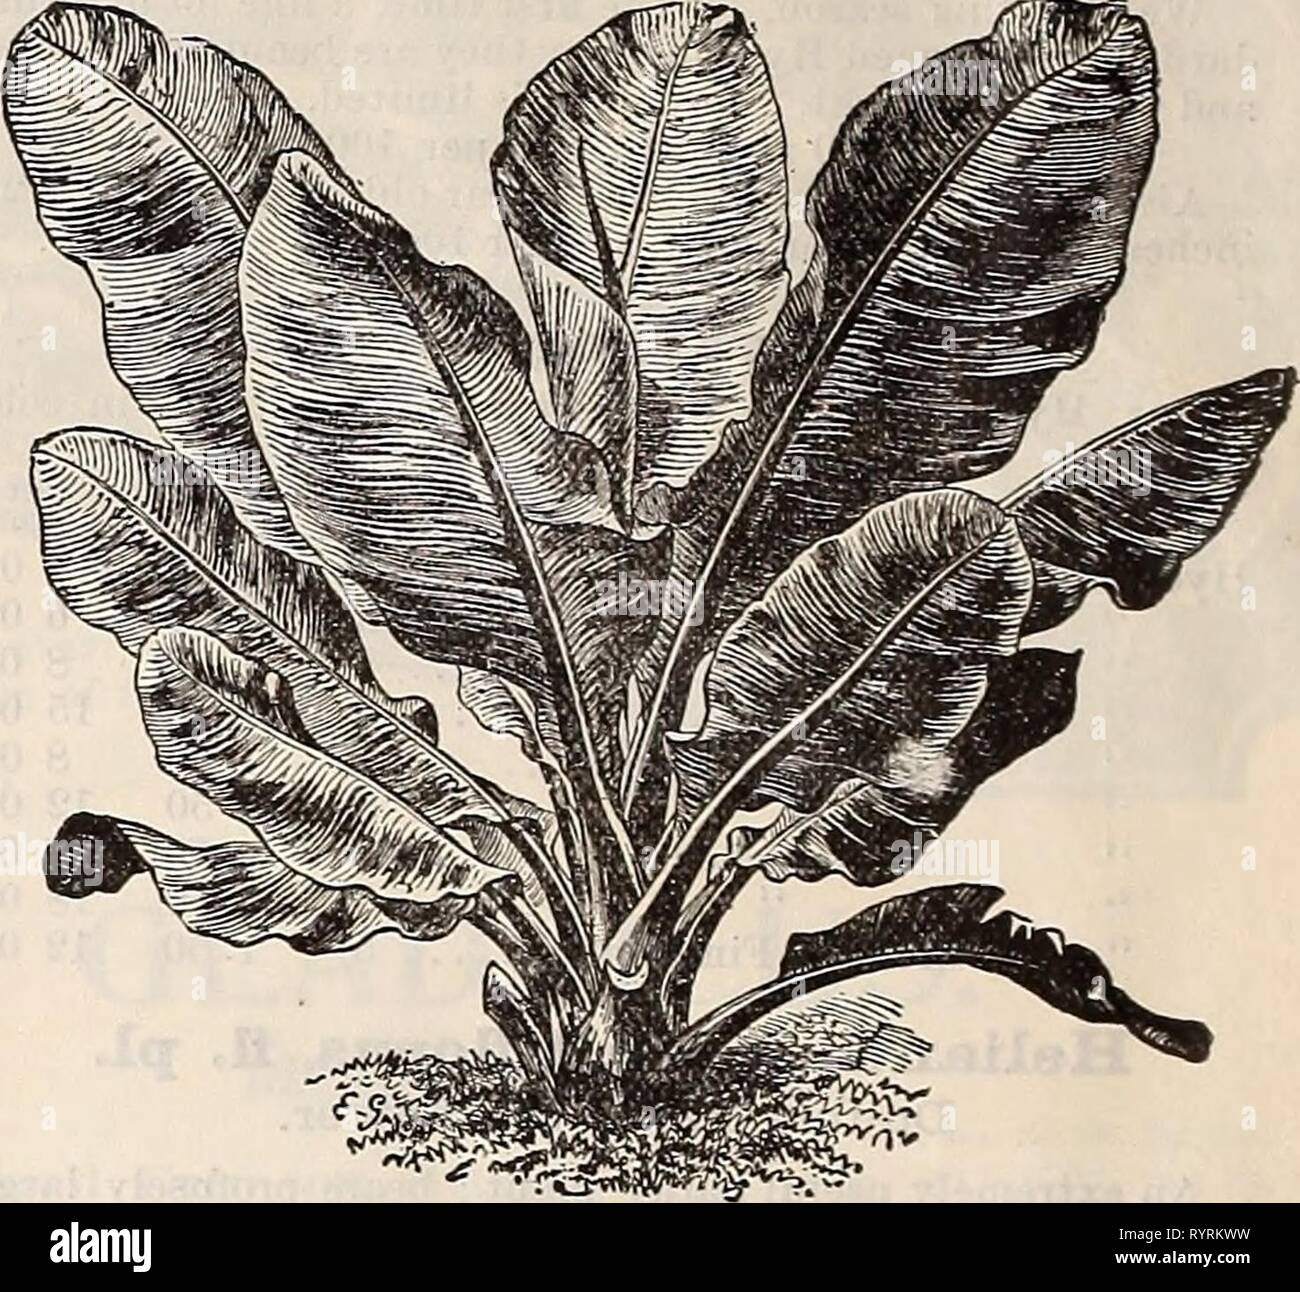 Dreer's quarterly wholesale price list Dreer's quarterly wholesale price list of seeds, plants &c. : winter edition January 1896 March . dreersquarterlyw1896henr 1 Year: 1896  Lychnis, Plexissiha Semperflokens.    Musa Ensete. Mnsa Ensete. Abyssinian Banana. The leaves of this magnificent plant are long, broad and massive, of a beautiful green, with a broad crimson midrib ; the plant grows luxuriantly from 8 to 12 feet high, producing a tropical effect. Strong 5 inch pots, 50 cents each. Otaheite Orange. We offer a fine lot of these in strong plants, which should fruit freely the coming season Stock Photo